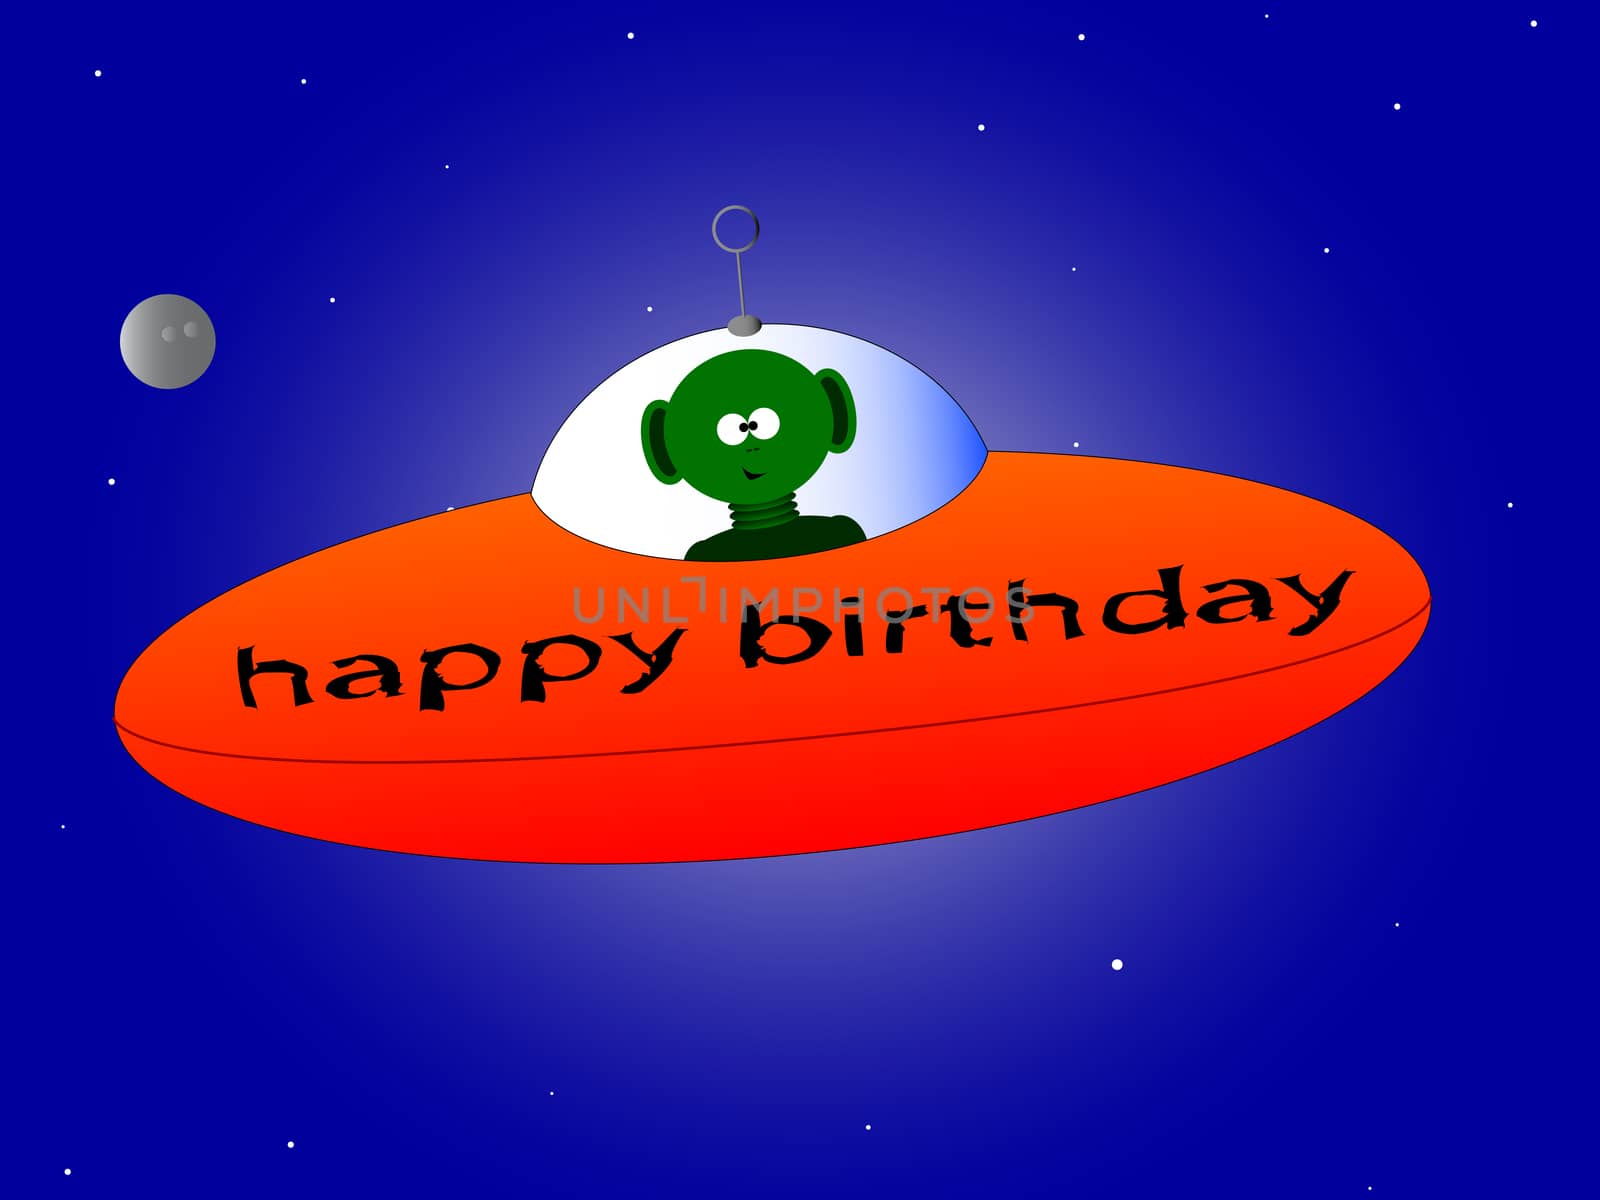 A happy birthday mesage from a flying saucer and alien.